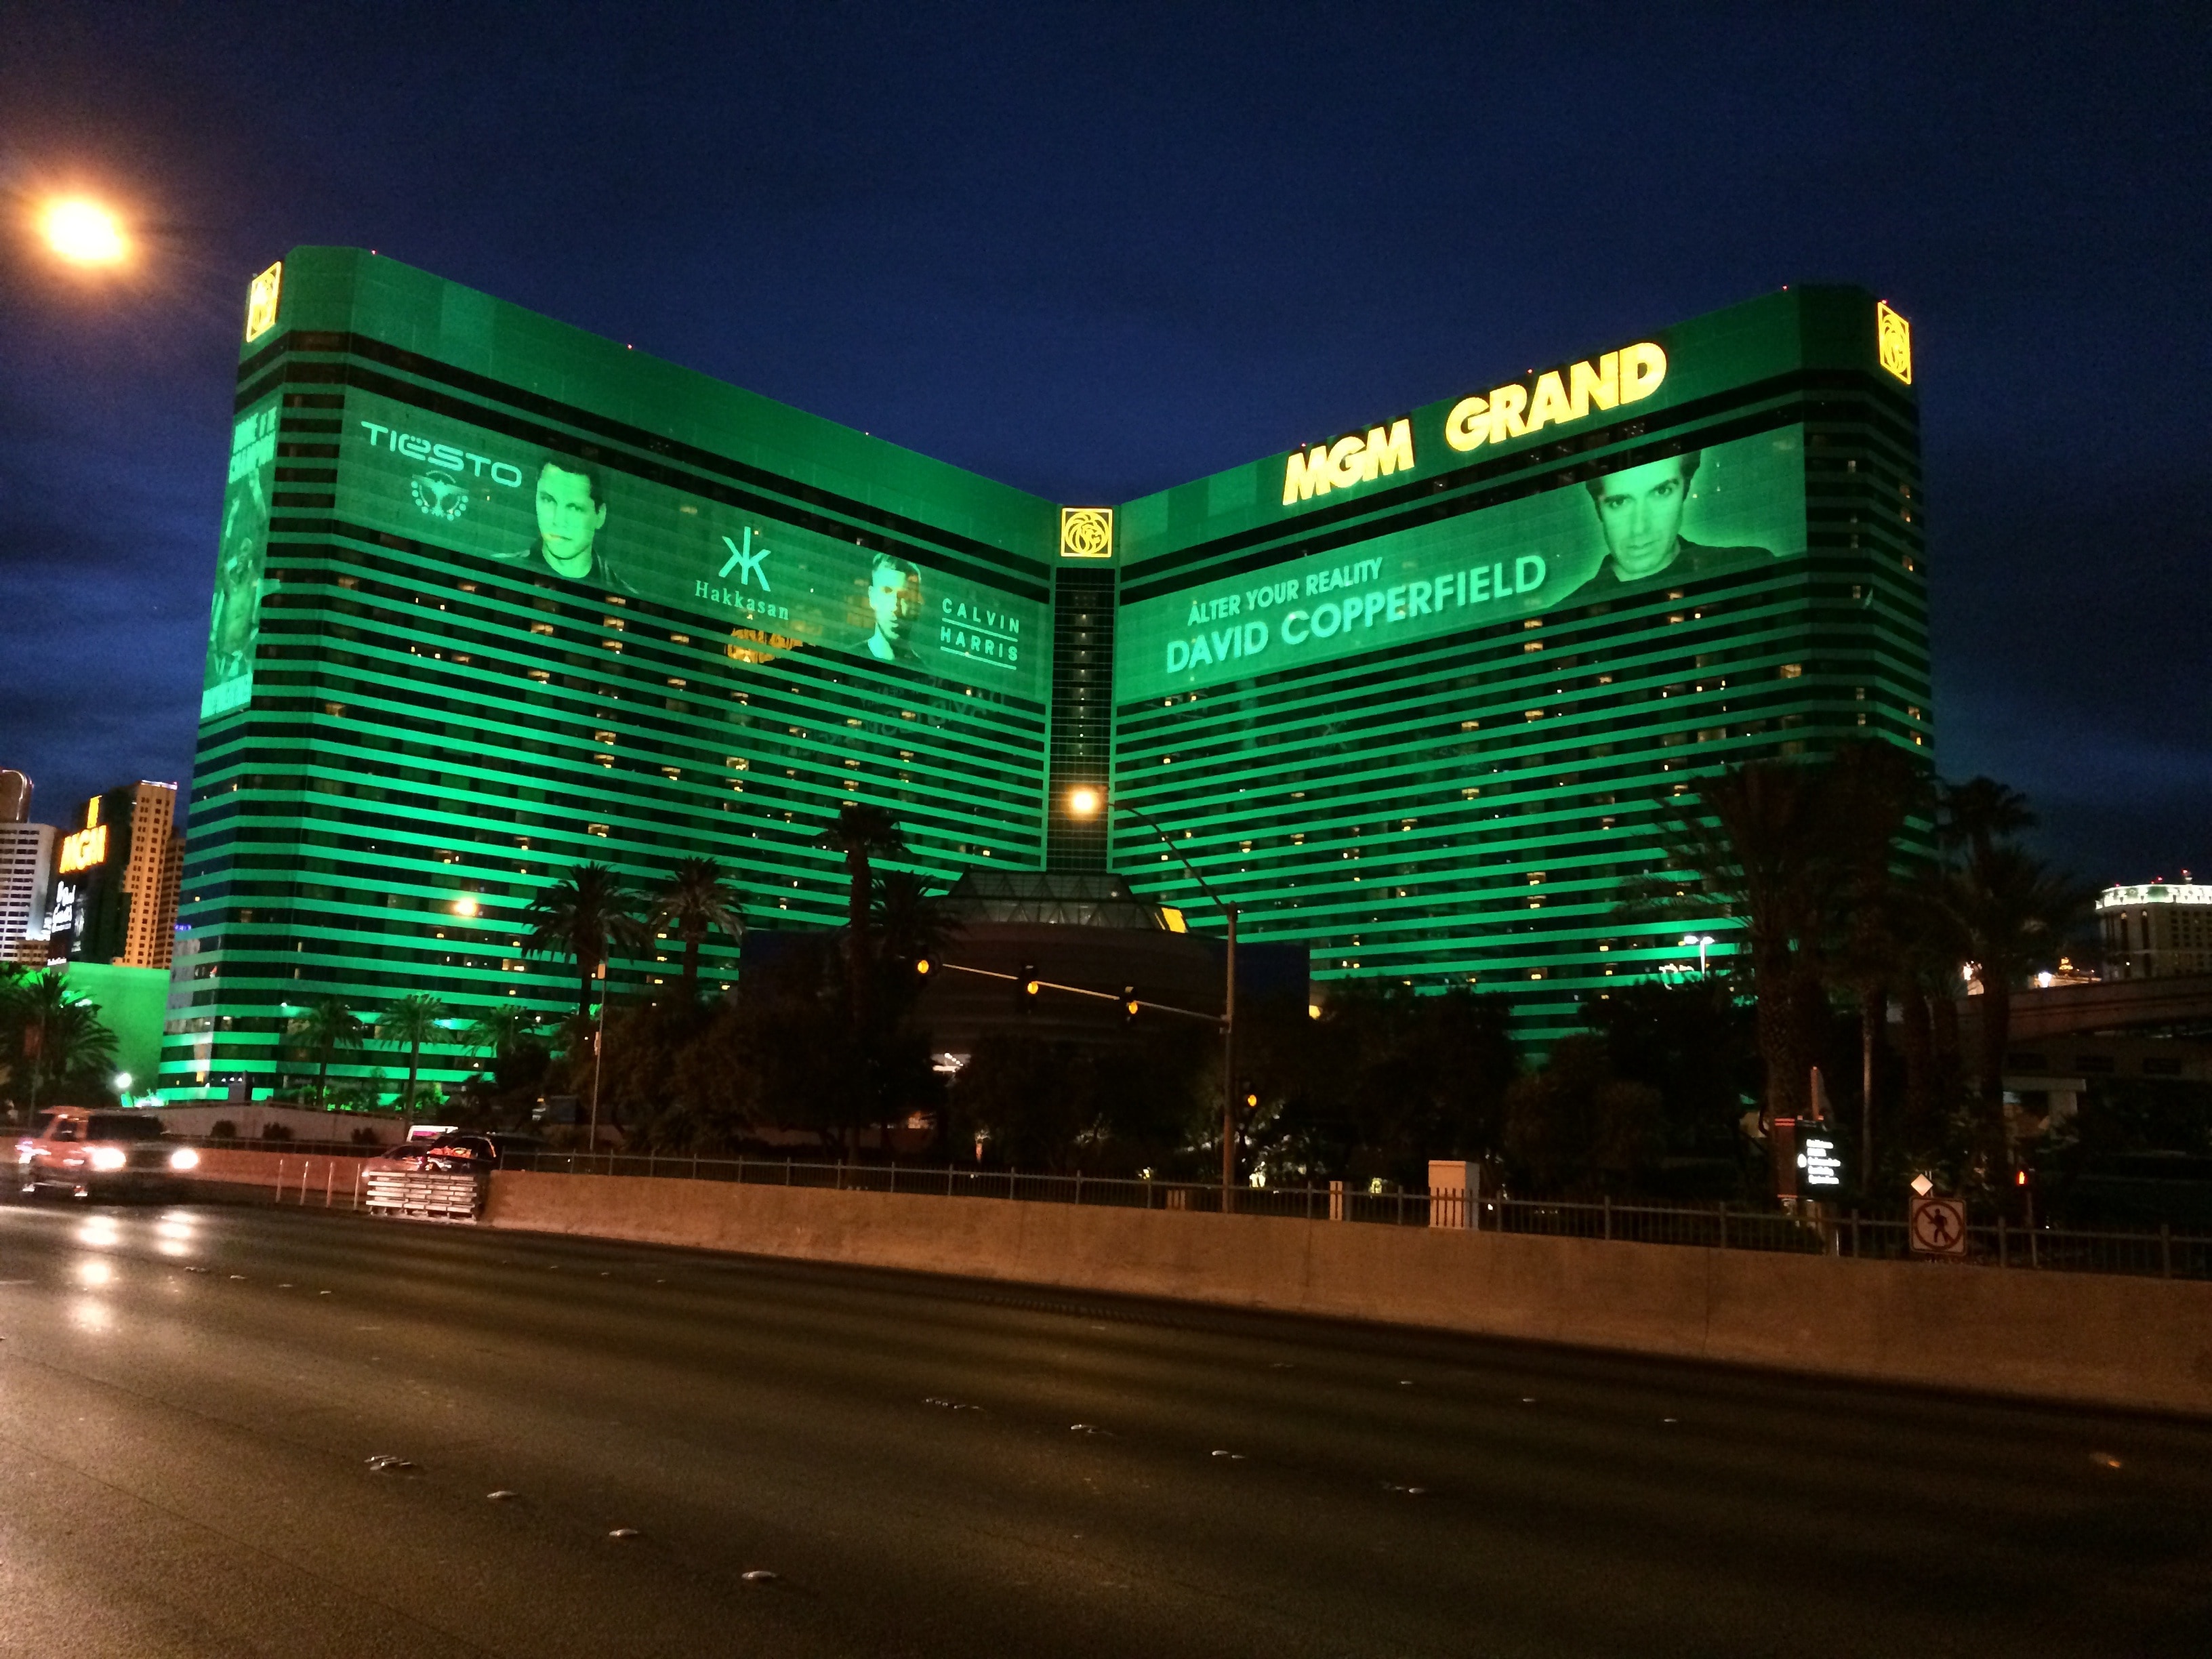 MGM Grand building during nighttime